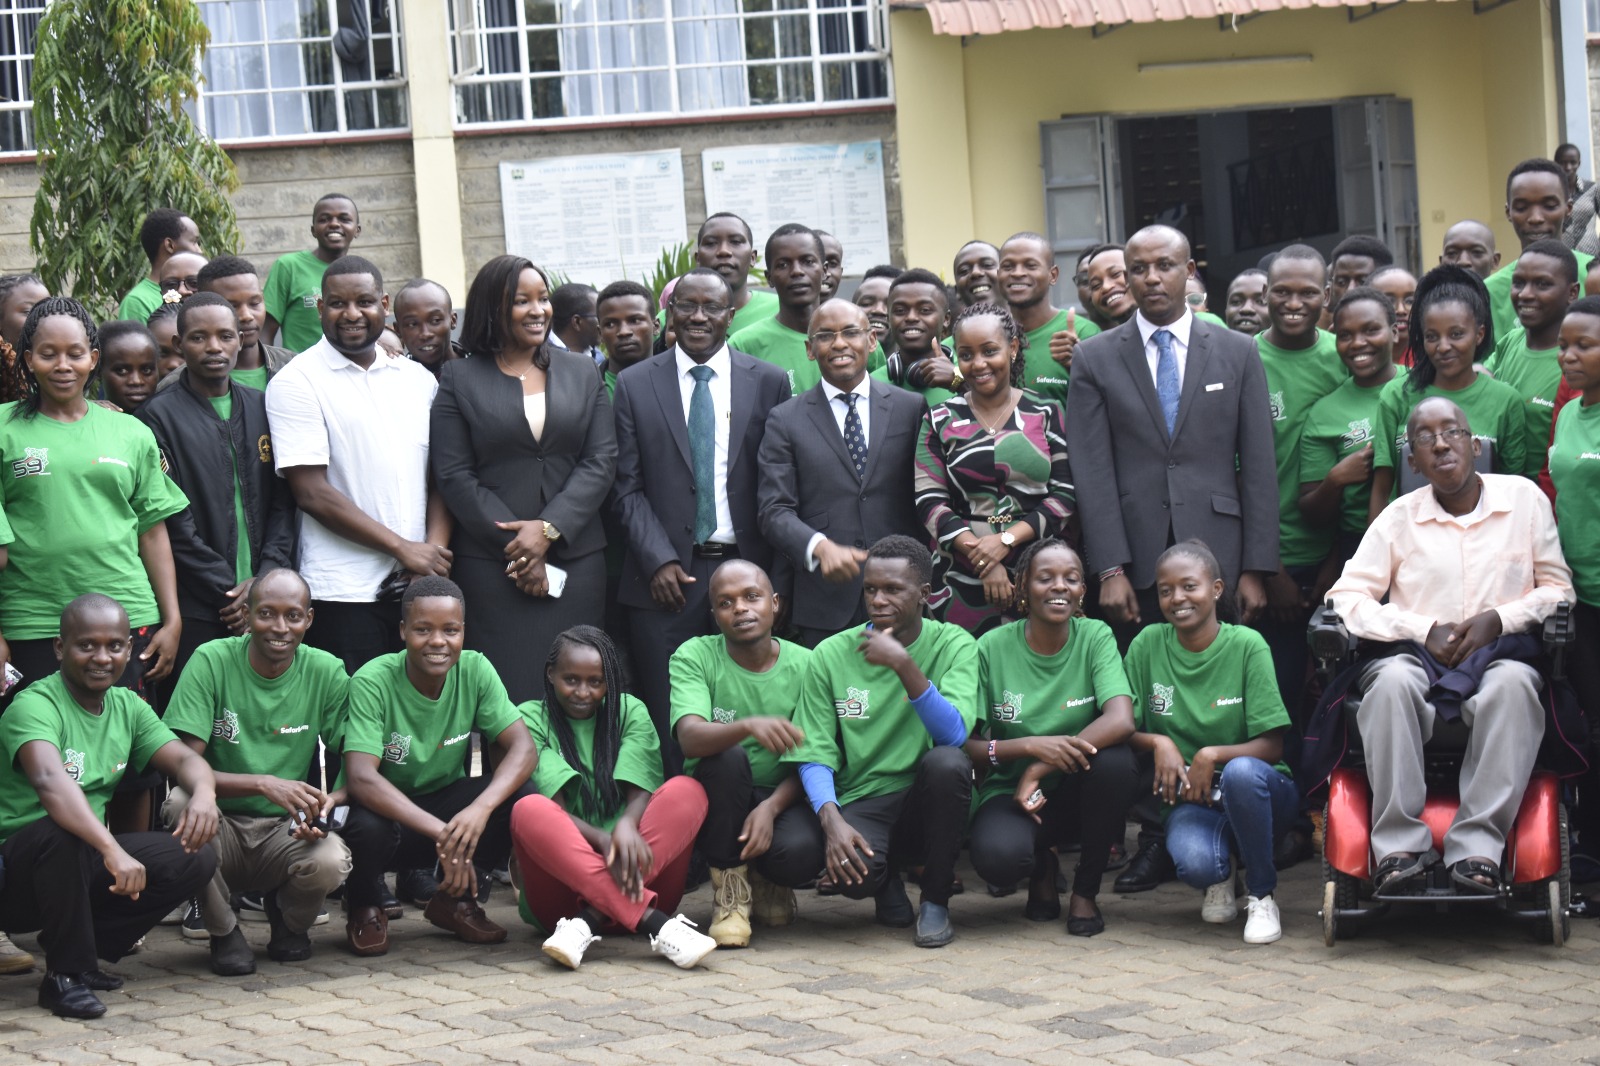 The Ceo Safaricom And His Excellency The Governor Makueni Visited Wote Technical Training Institute To Grace The Safaricom Engineering Community Training After Launching Mycounty App For Makueni County